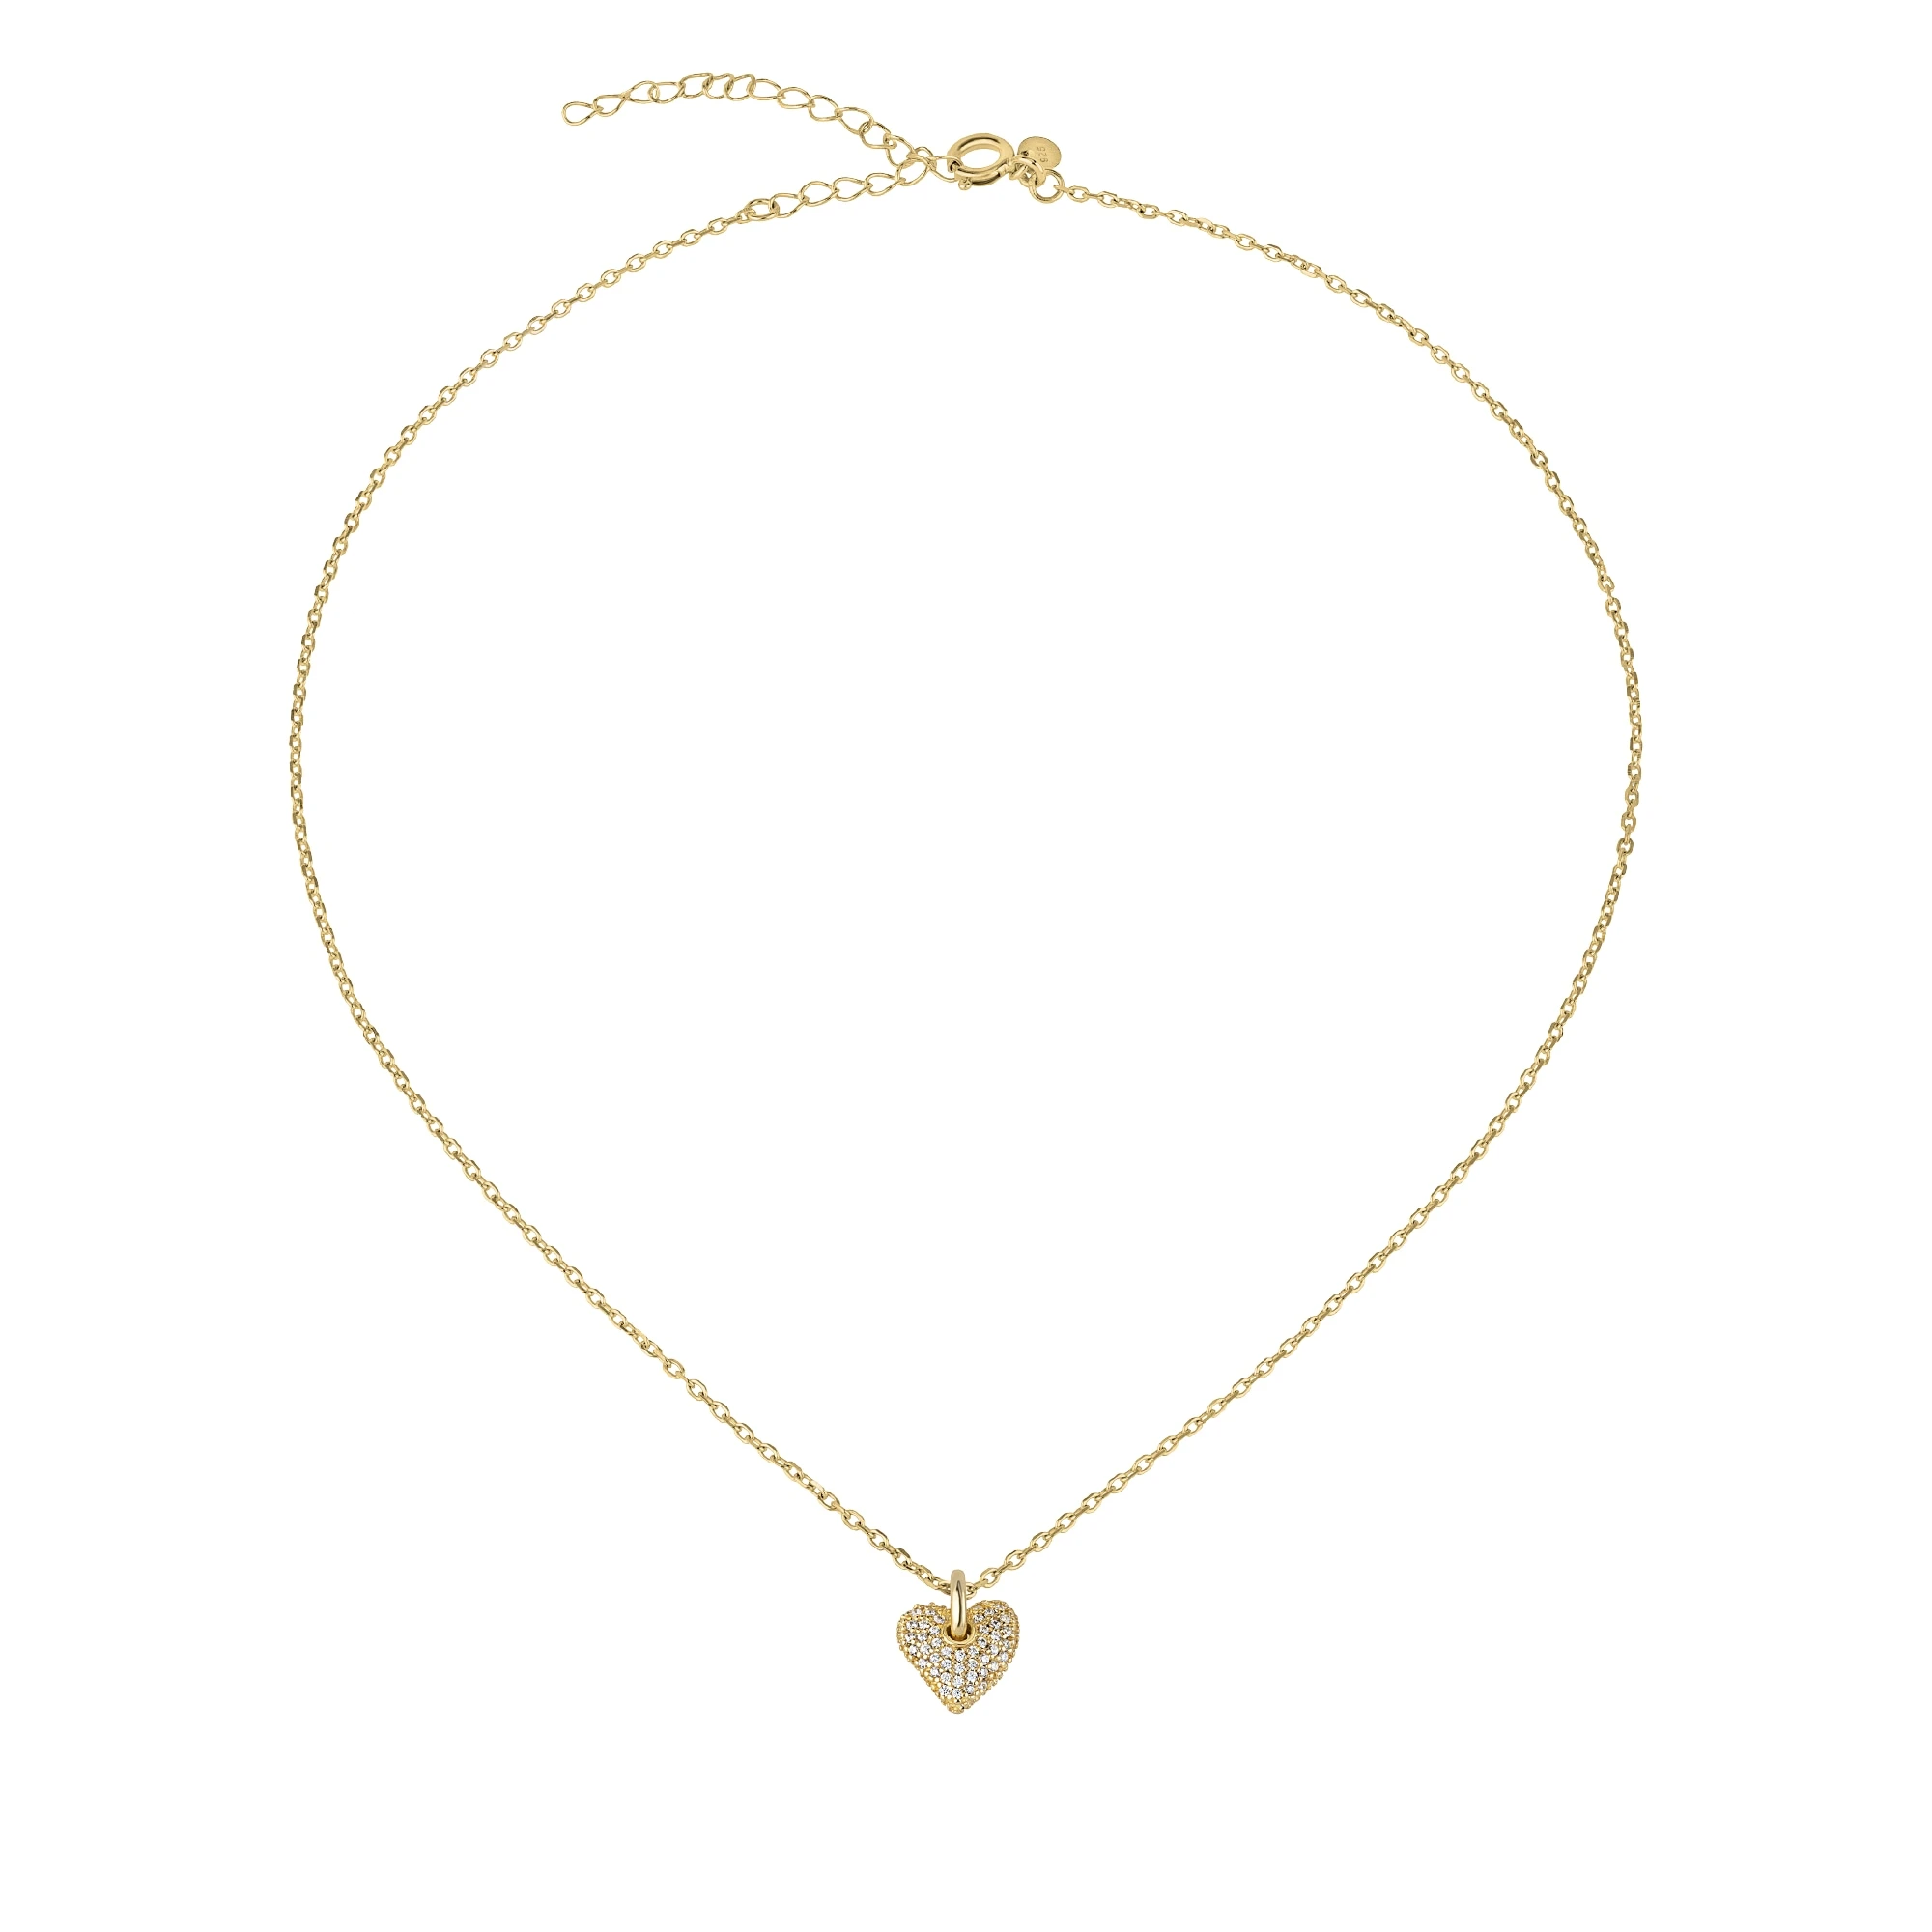 DARLING - 18K GOLD PLATED SILVER CHAIN AND PENDANT WITH CUBIC ZIRCONIA - 1 - TJ3156 | Breil